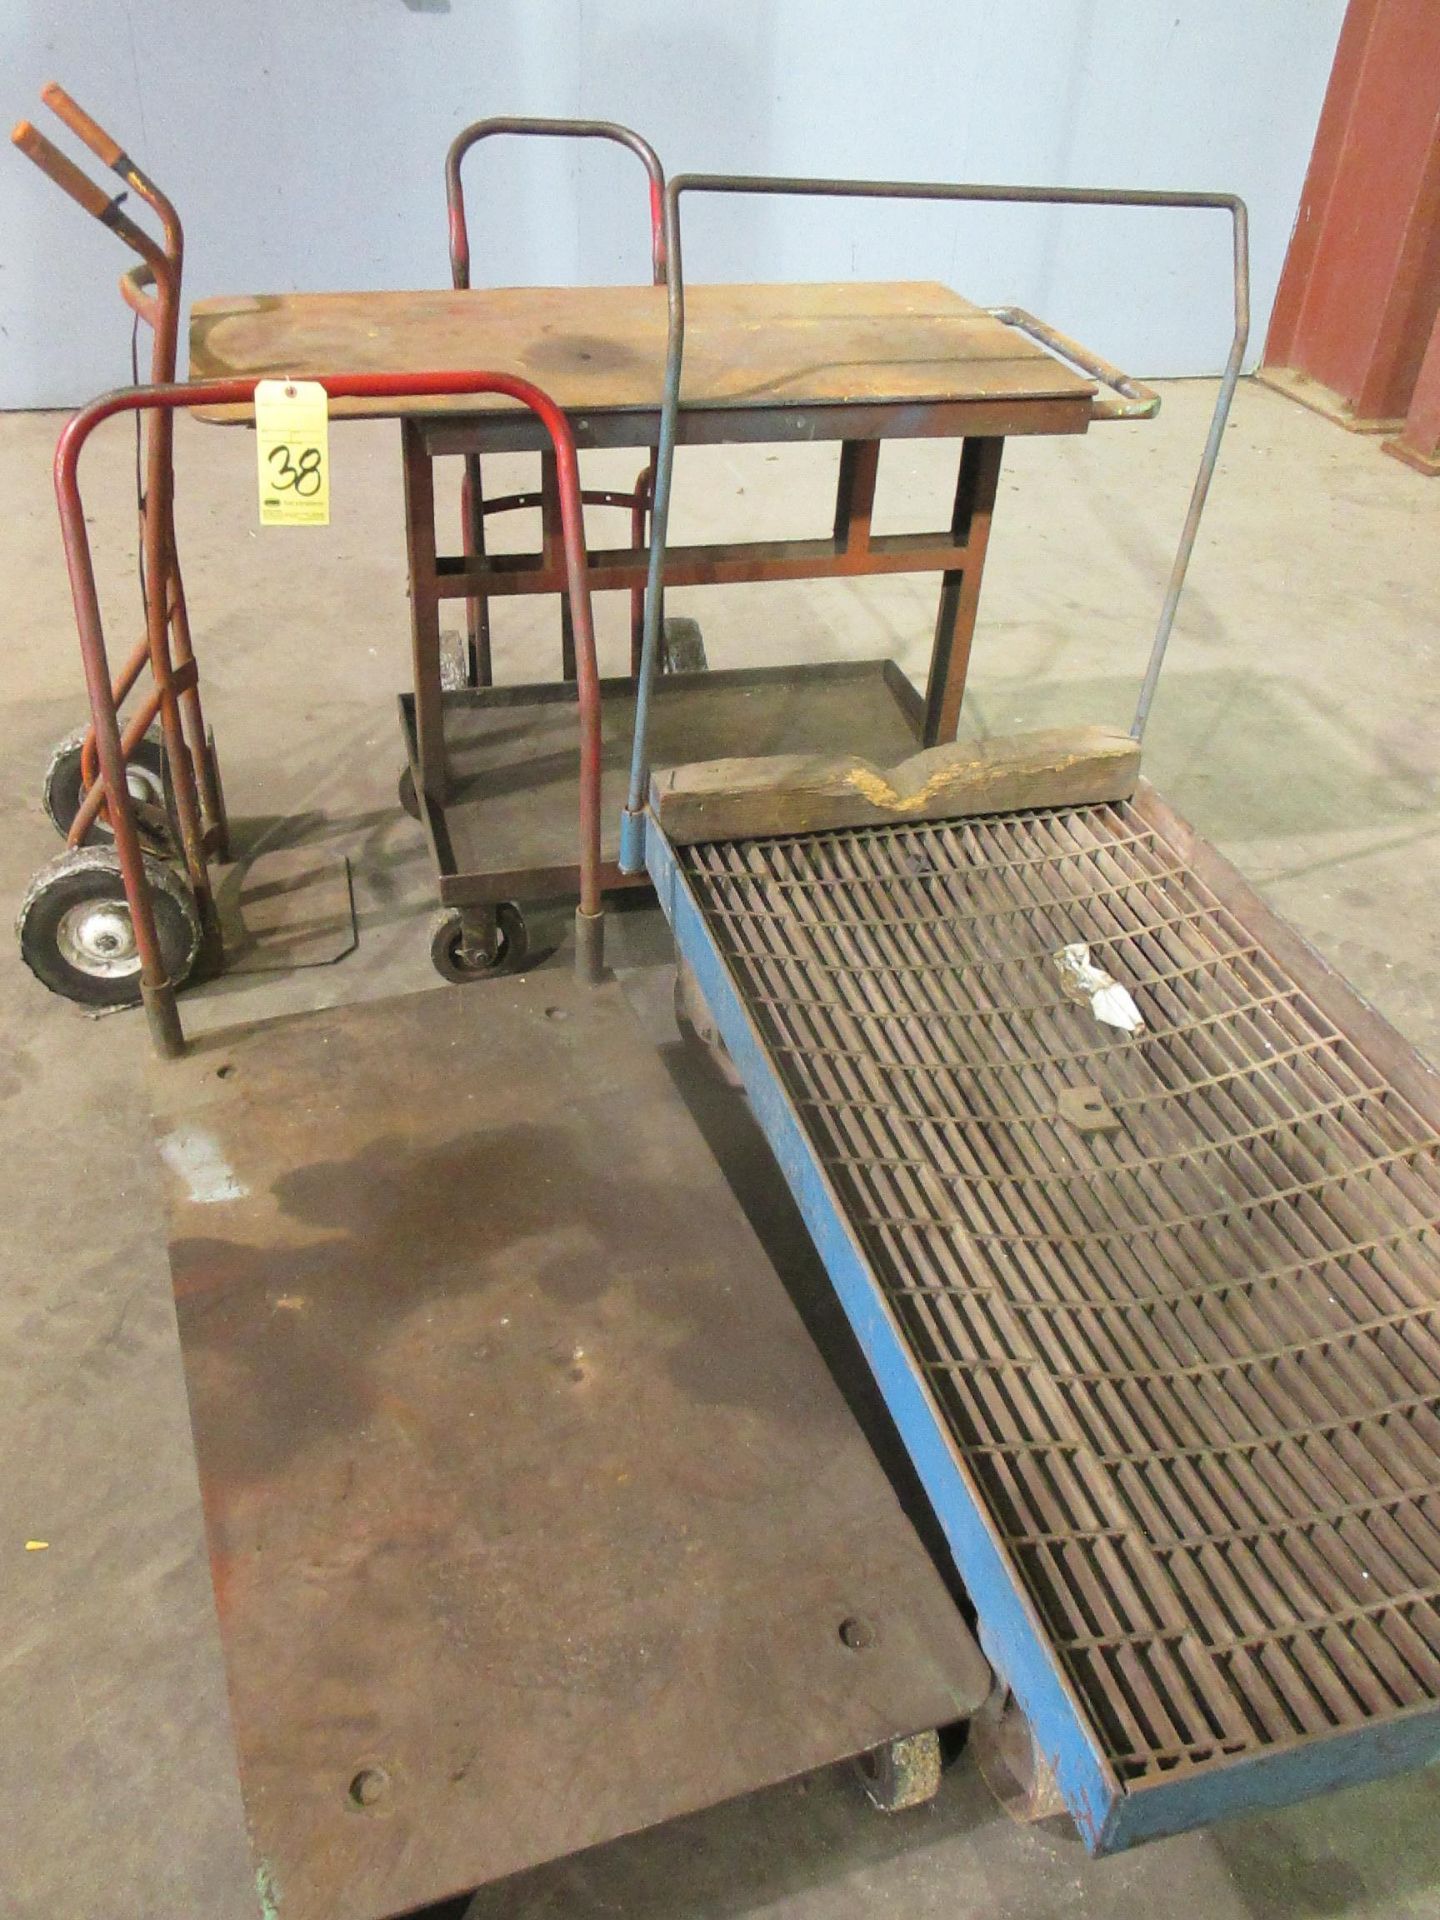 LOT CONSISTING OF: roller shop carts & dollies